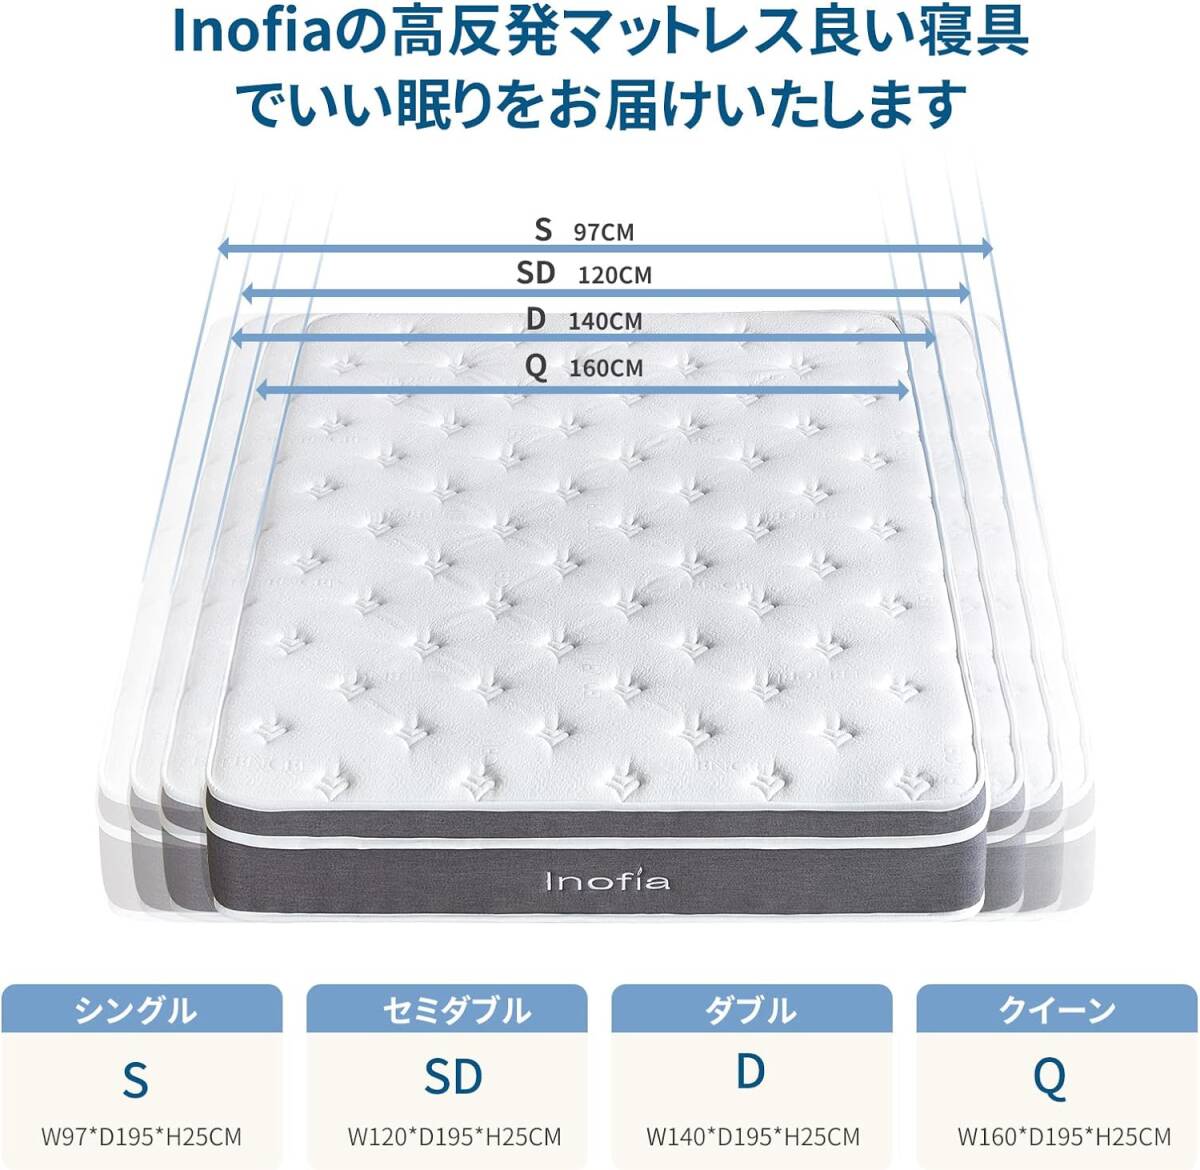 Inofia mattress Queen height repulsion mattress extremely thick 25CM bed mattress pocket coil anti-bacterial deodorization processing height ventilation ( sense of stability. exist a little ..)